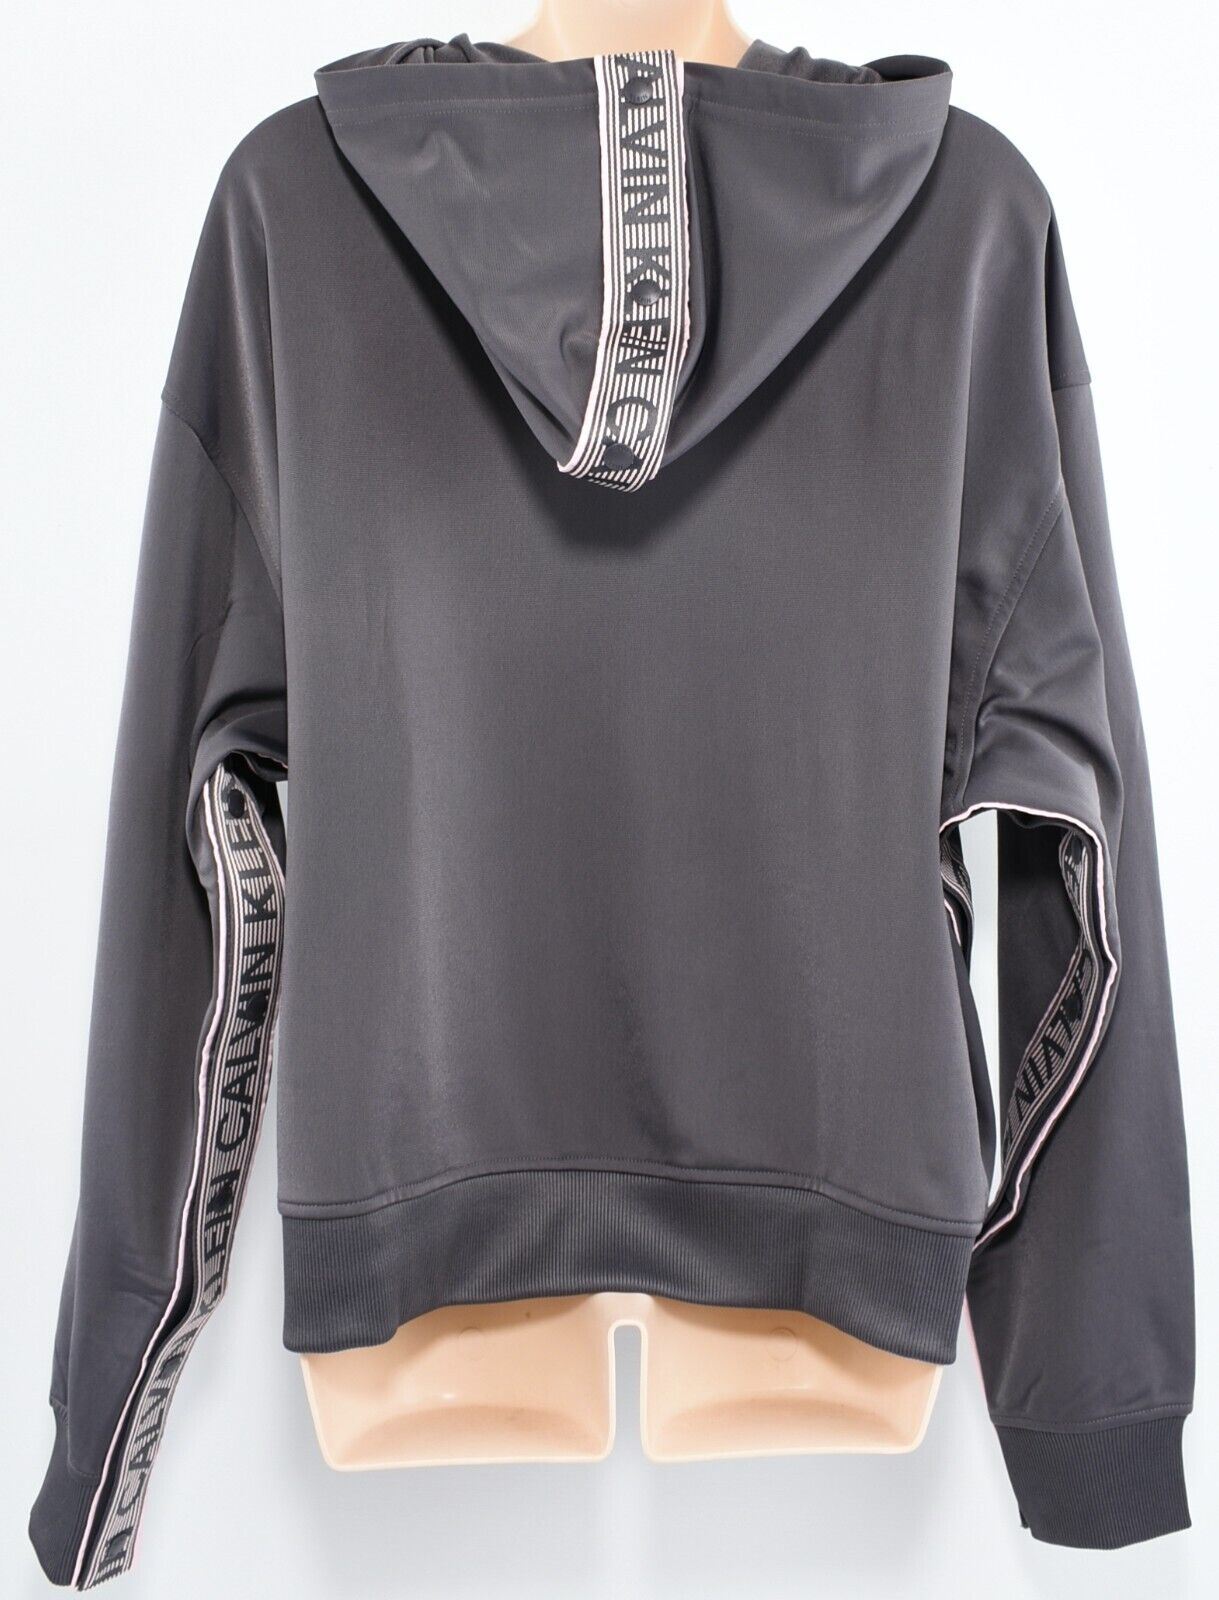 CALVIN KLEIN Performance - Women's Relaxed Fit Hoodie, Blackened Pearl, size XS